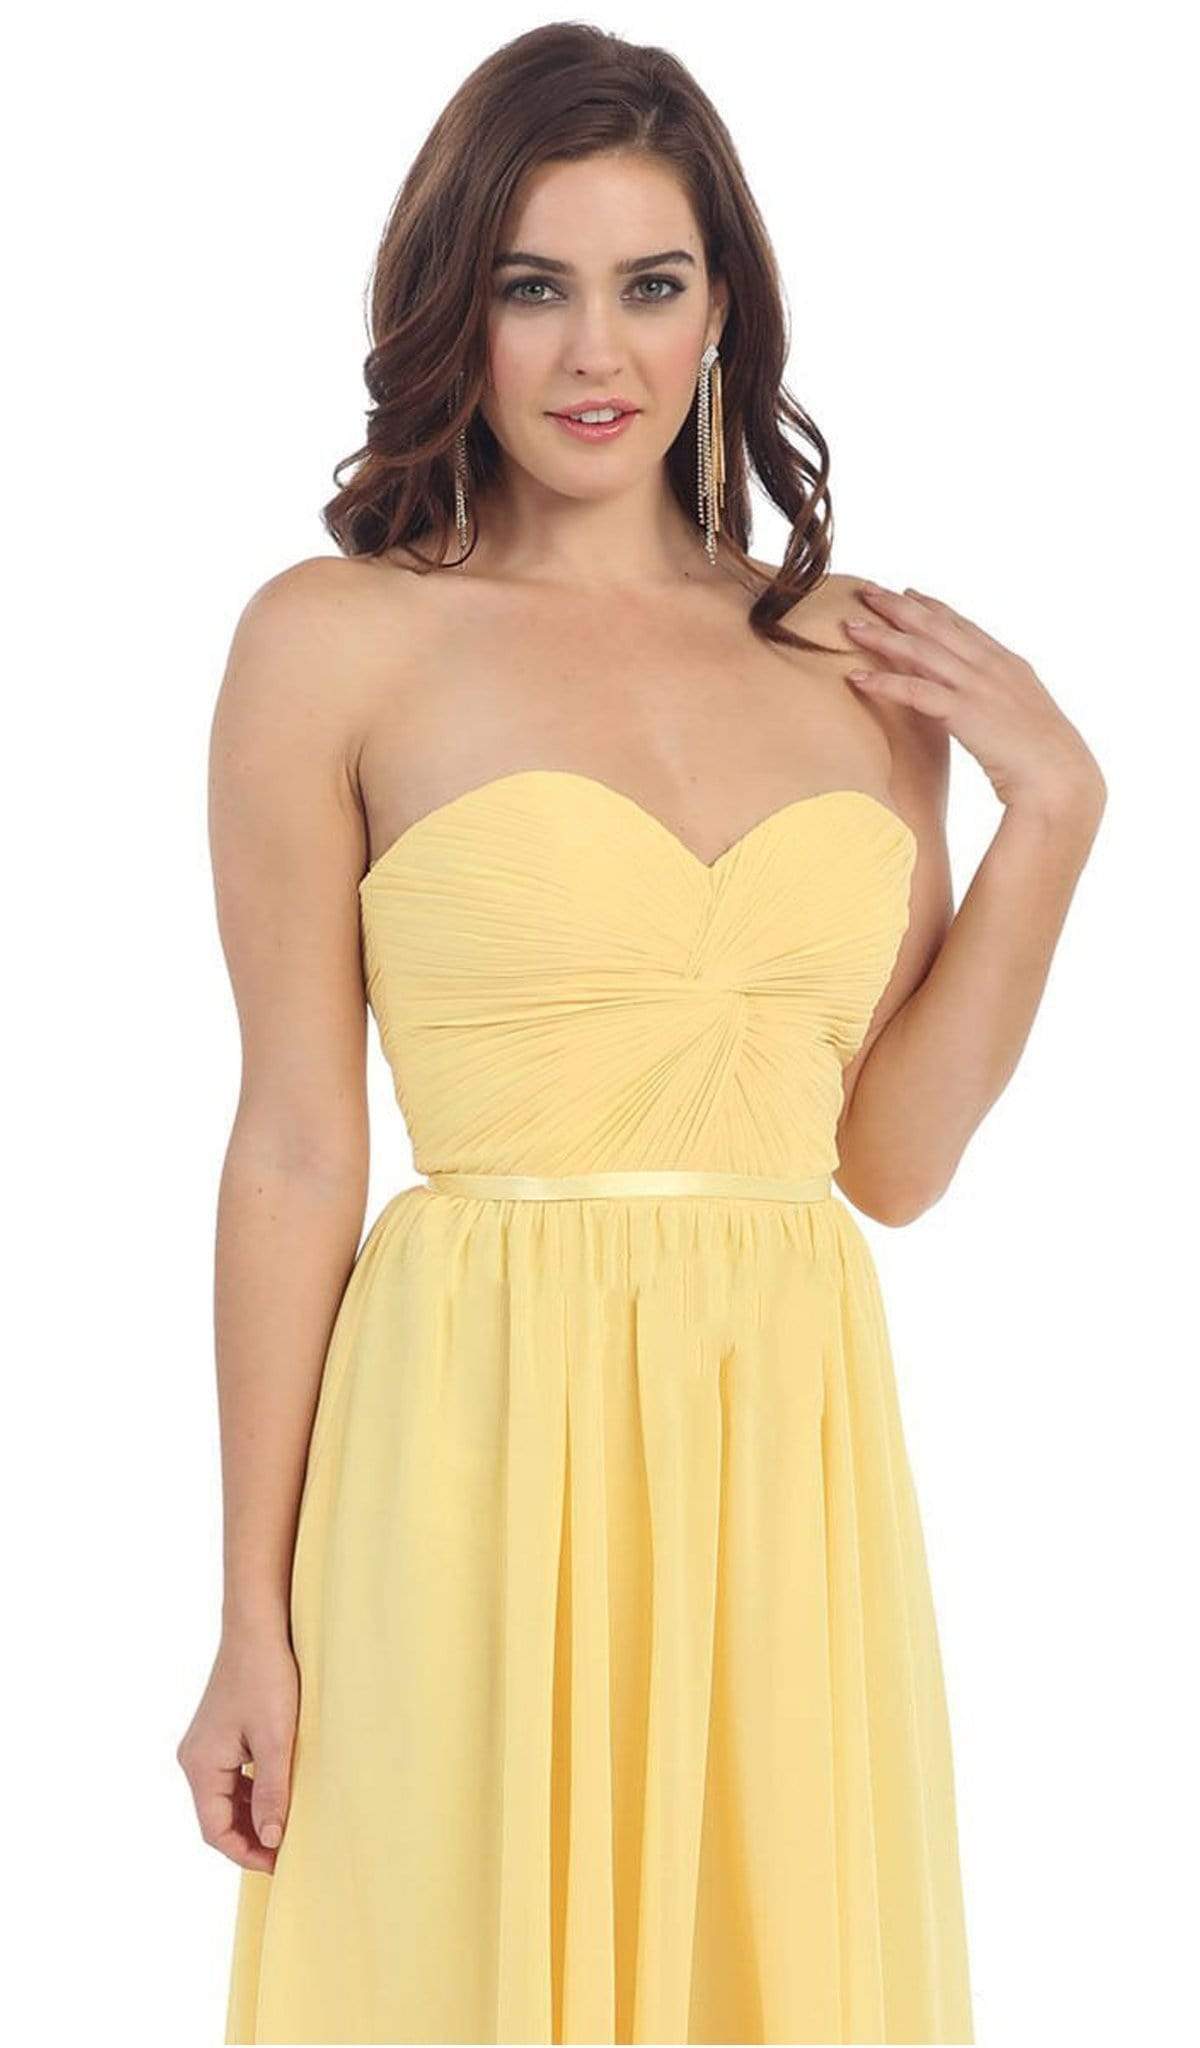 May Queen - Strapless Ruched Sweetheart Chiffon Prom Dress Special Occasion Dress